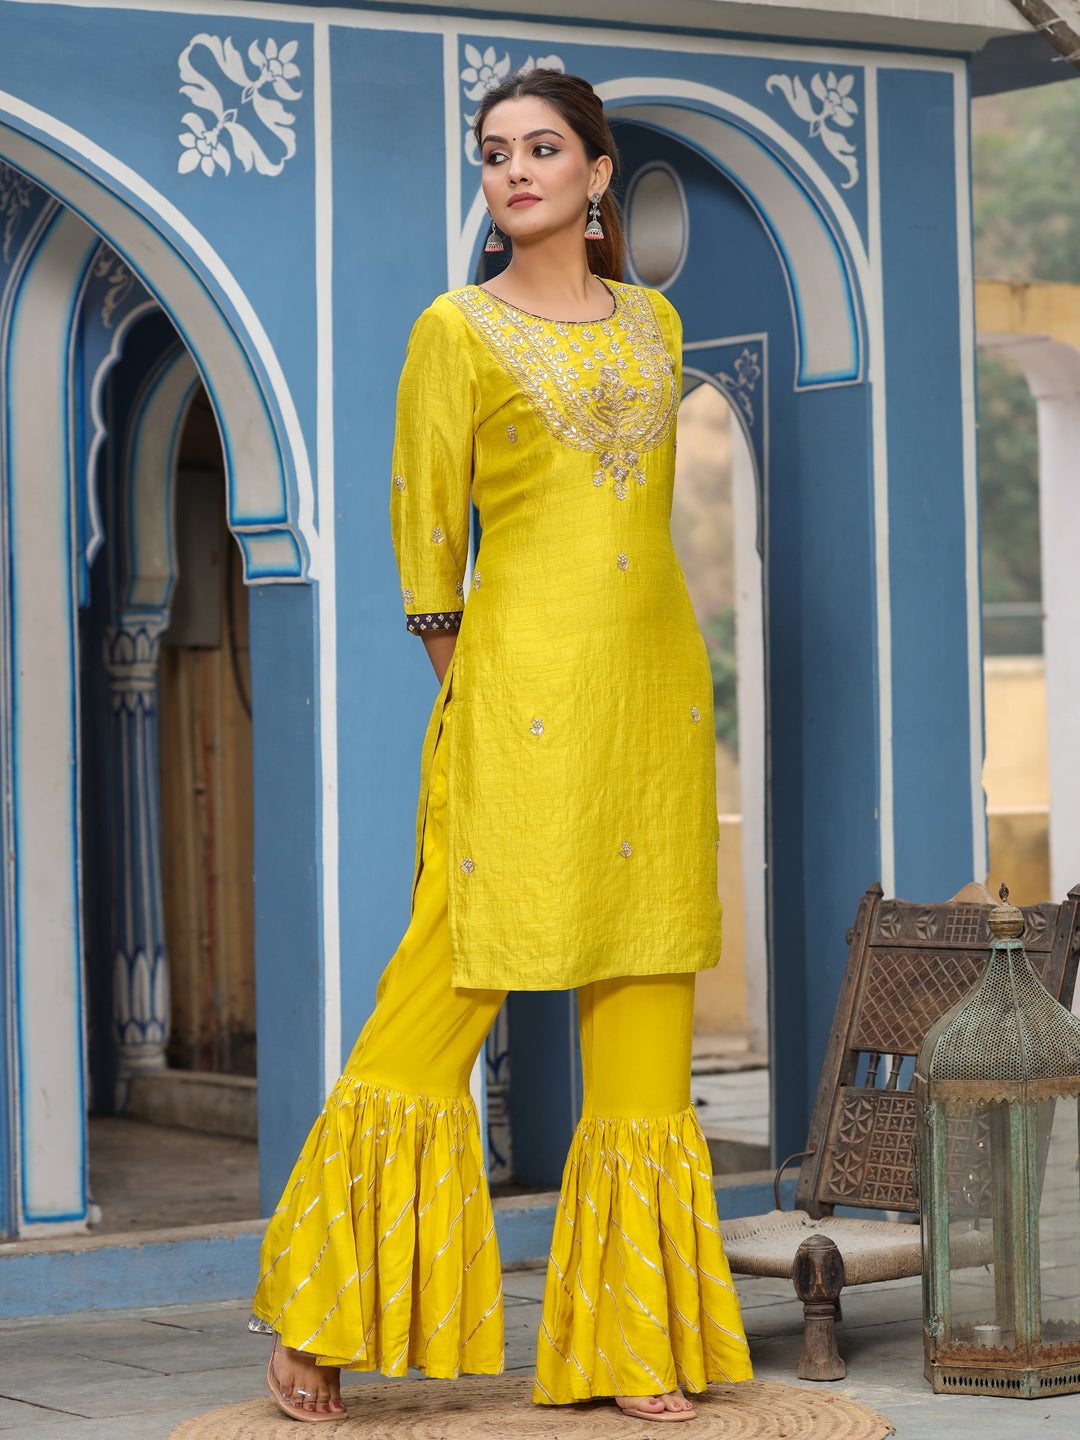 Exclusive Collection of Women Ethnic Wear Online